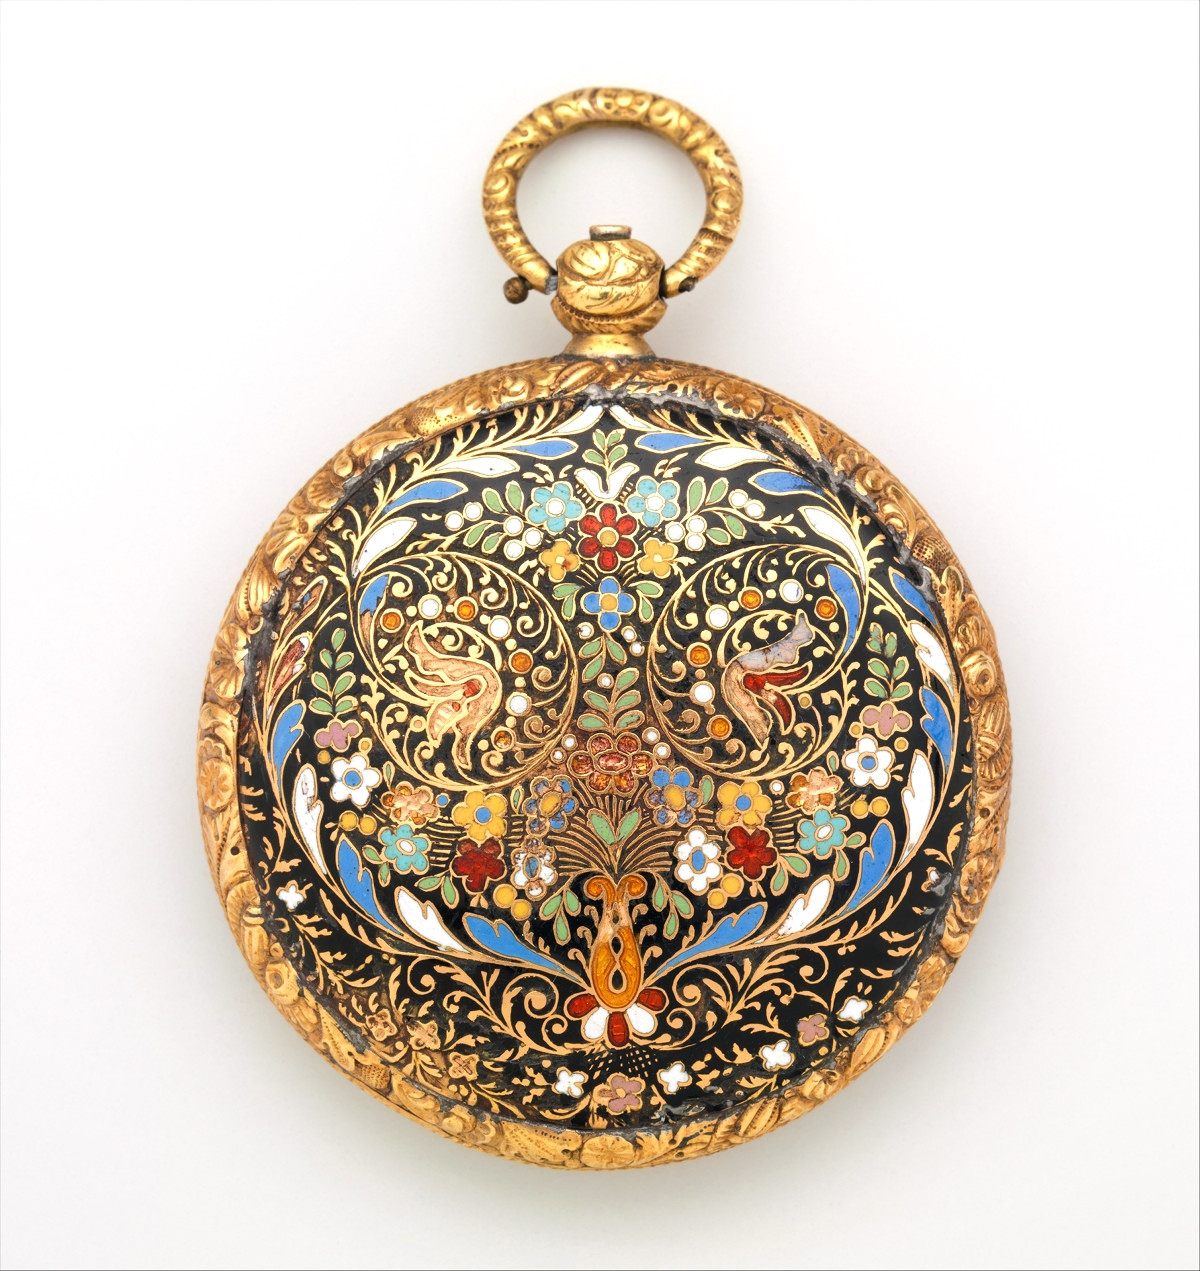 1820. Watch. Swiss, Geneva. Case of gold and enamel, with floral design. metmuseum